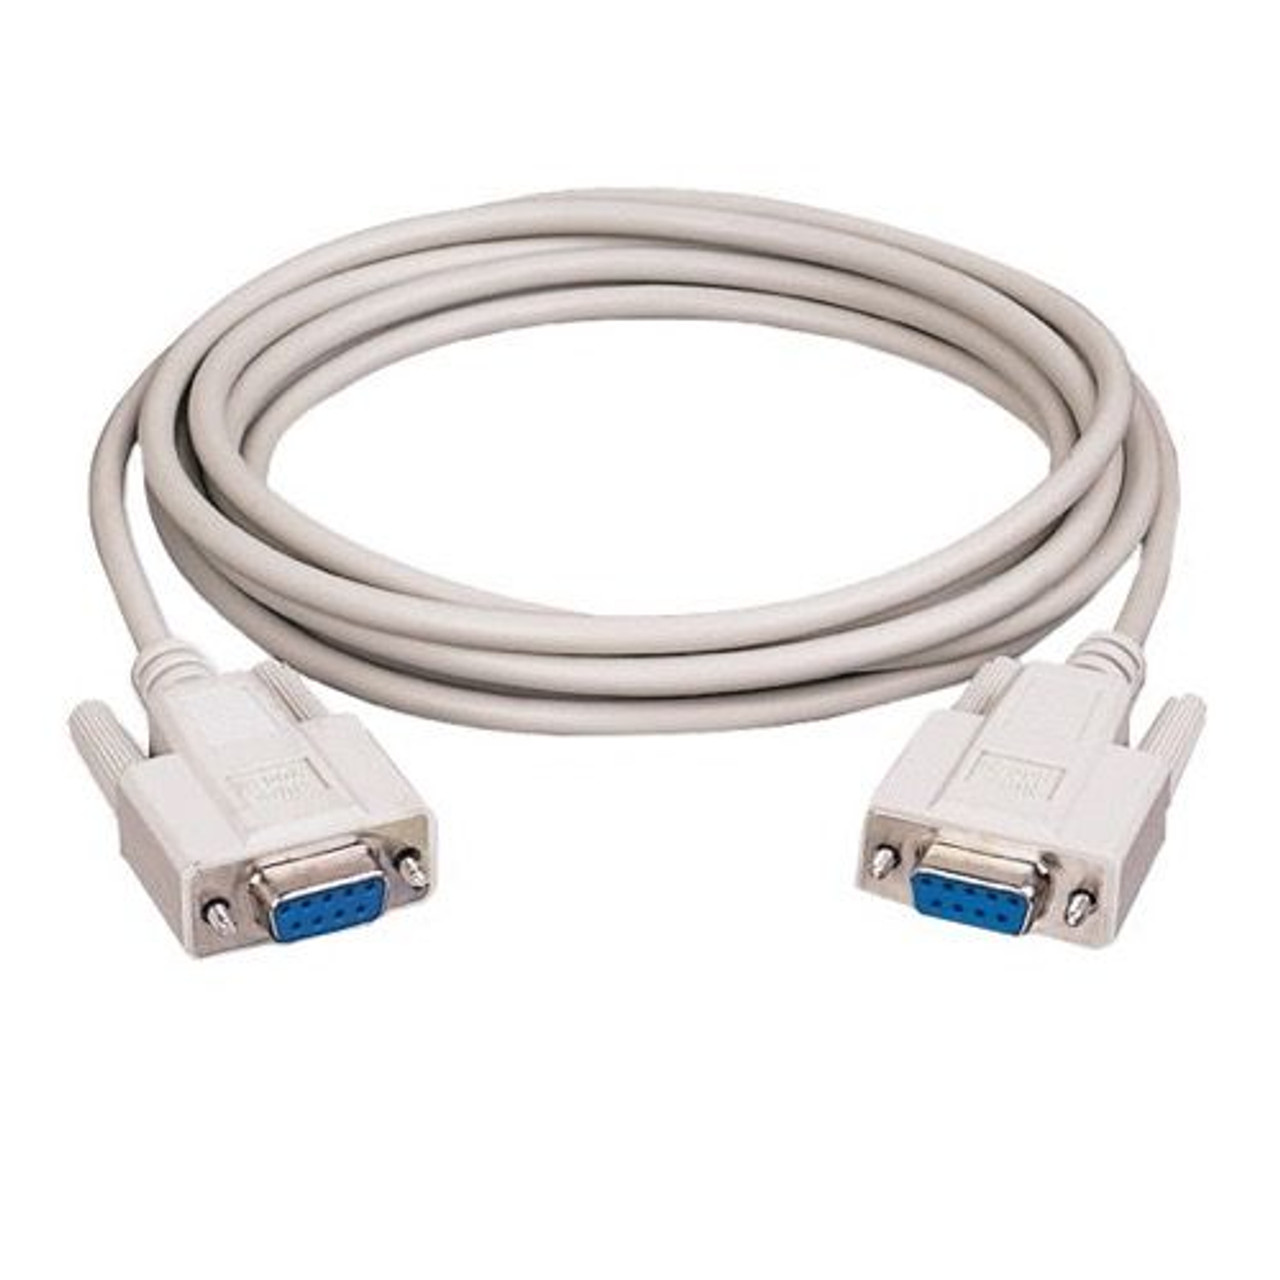 Summit DB9 3' FT Female to Female Cable Ivory Straight Thru Cable with RS232 Connectors Each End DB-9 RS-232 Data Transfer Interconnect Computer Cable